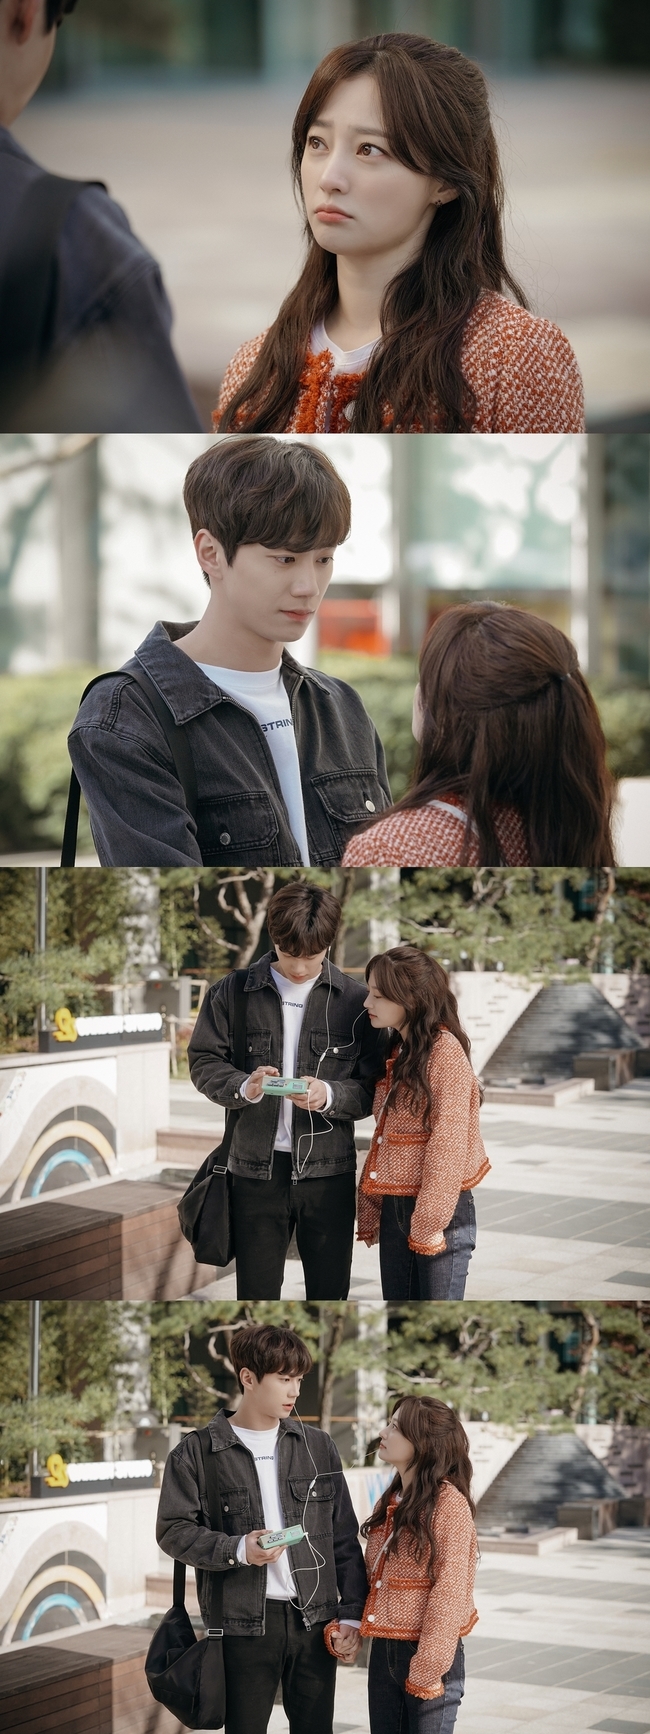 Please dont meet the man Song Ha-yoon and Lee JunYoungs retro date was captured.MBC Everlon drama Please Dont Meet The Man (Song Ha-yoon) is entering the latter half of the drama Songpyeon/Songpyeon/Song Mi-kyung/Producer Cornerstone Pictures/hereinafter, Jegmayo), and romance of Seo Ji Sung and Jungkookhee (Lee Junyoung) is also exploding.In the last seven endings, they finally kissed the first sweet kiss at the bus stop in the middle of the night, and the scene of the last bus passing by with the kiss of the two picturesque kisses behind them gave a heartbeat.The love of two people who solved repeated misunderstandings and started a long way.Indeed, the interest and expectation of enthusiastic viewers are soaring as to what romance scenes Ji Sung and Jungkook Hee will pour out with the start of full-scale love.Meanwhile, on December 27, the production team of Jegmayo unveiled the retro dating scene of Seo Ji Sung and Jungkook Hee.The released photo captures a scene of the 8th episode of Zegmayo which will be broadcast on December 29th.In the first photo, Ji Sung looks at Jungkook with a pointed expression as if it were a torment.Jungkookhee looks at Ji Sung with a sweet, honey-dropping look, and the love of a couple who just started to love is buried in it, and it feels cute and lovely.At the same time, it is the distance of two people who are close enough to share their hobbies.Jungkook Hee, who does not feel uncomfortable without a smartphone, listens to music as a workman who puts cassette tape and plays it.On the other hand, Ji Sung is always close to AI as he has a job as a developer of artificial intelligence appliances.The opposite two people share their earphones one by one and hold their hands together and listen to music together.